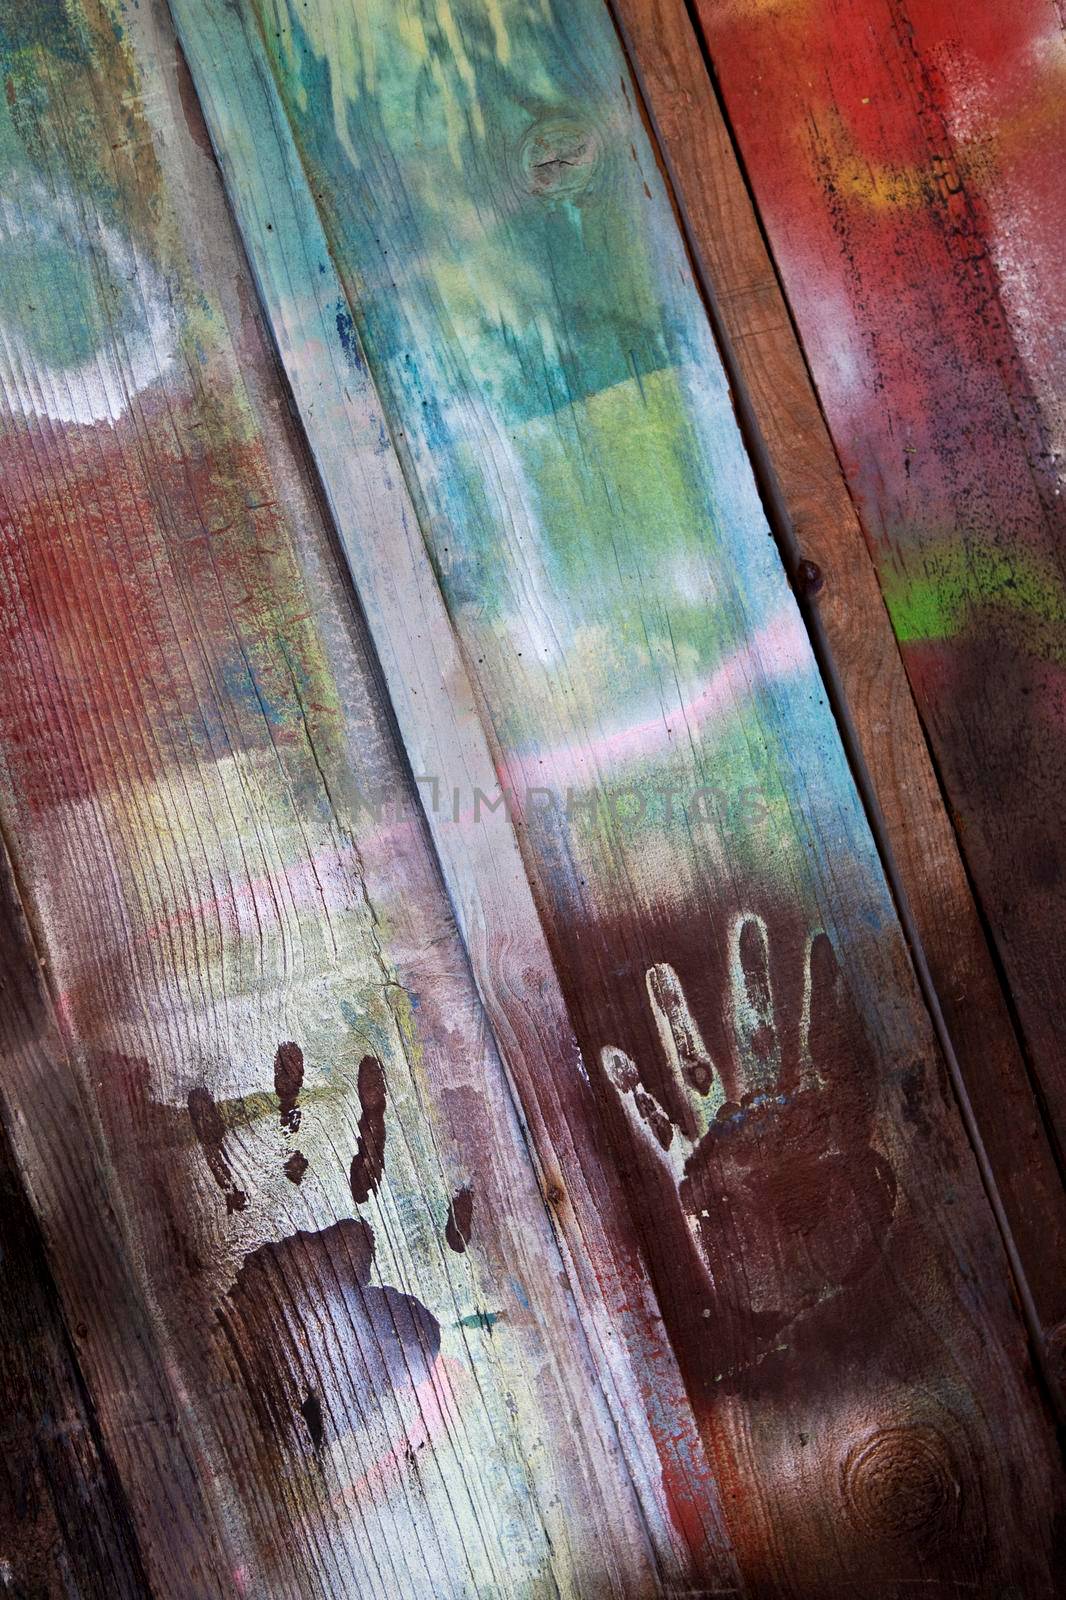 Handprints on a painted wooden wall